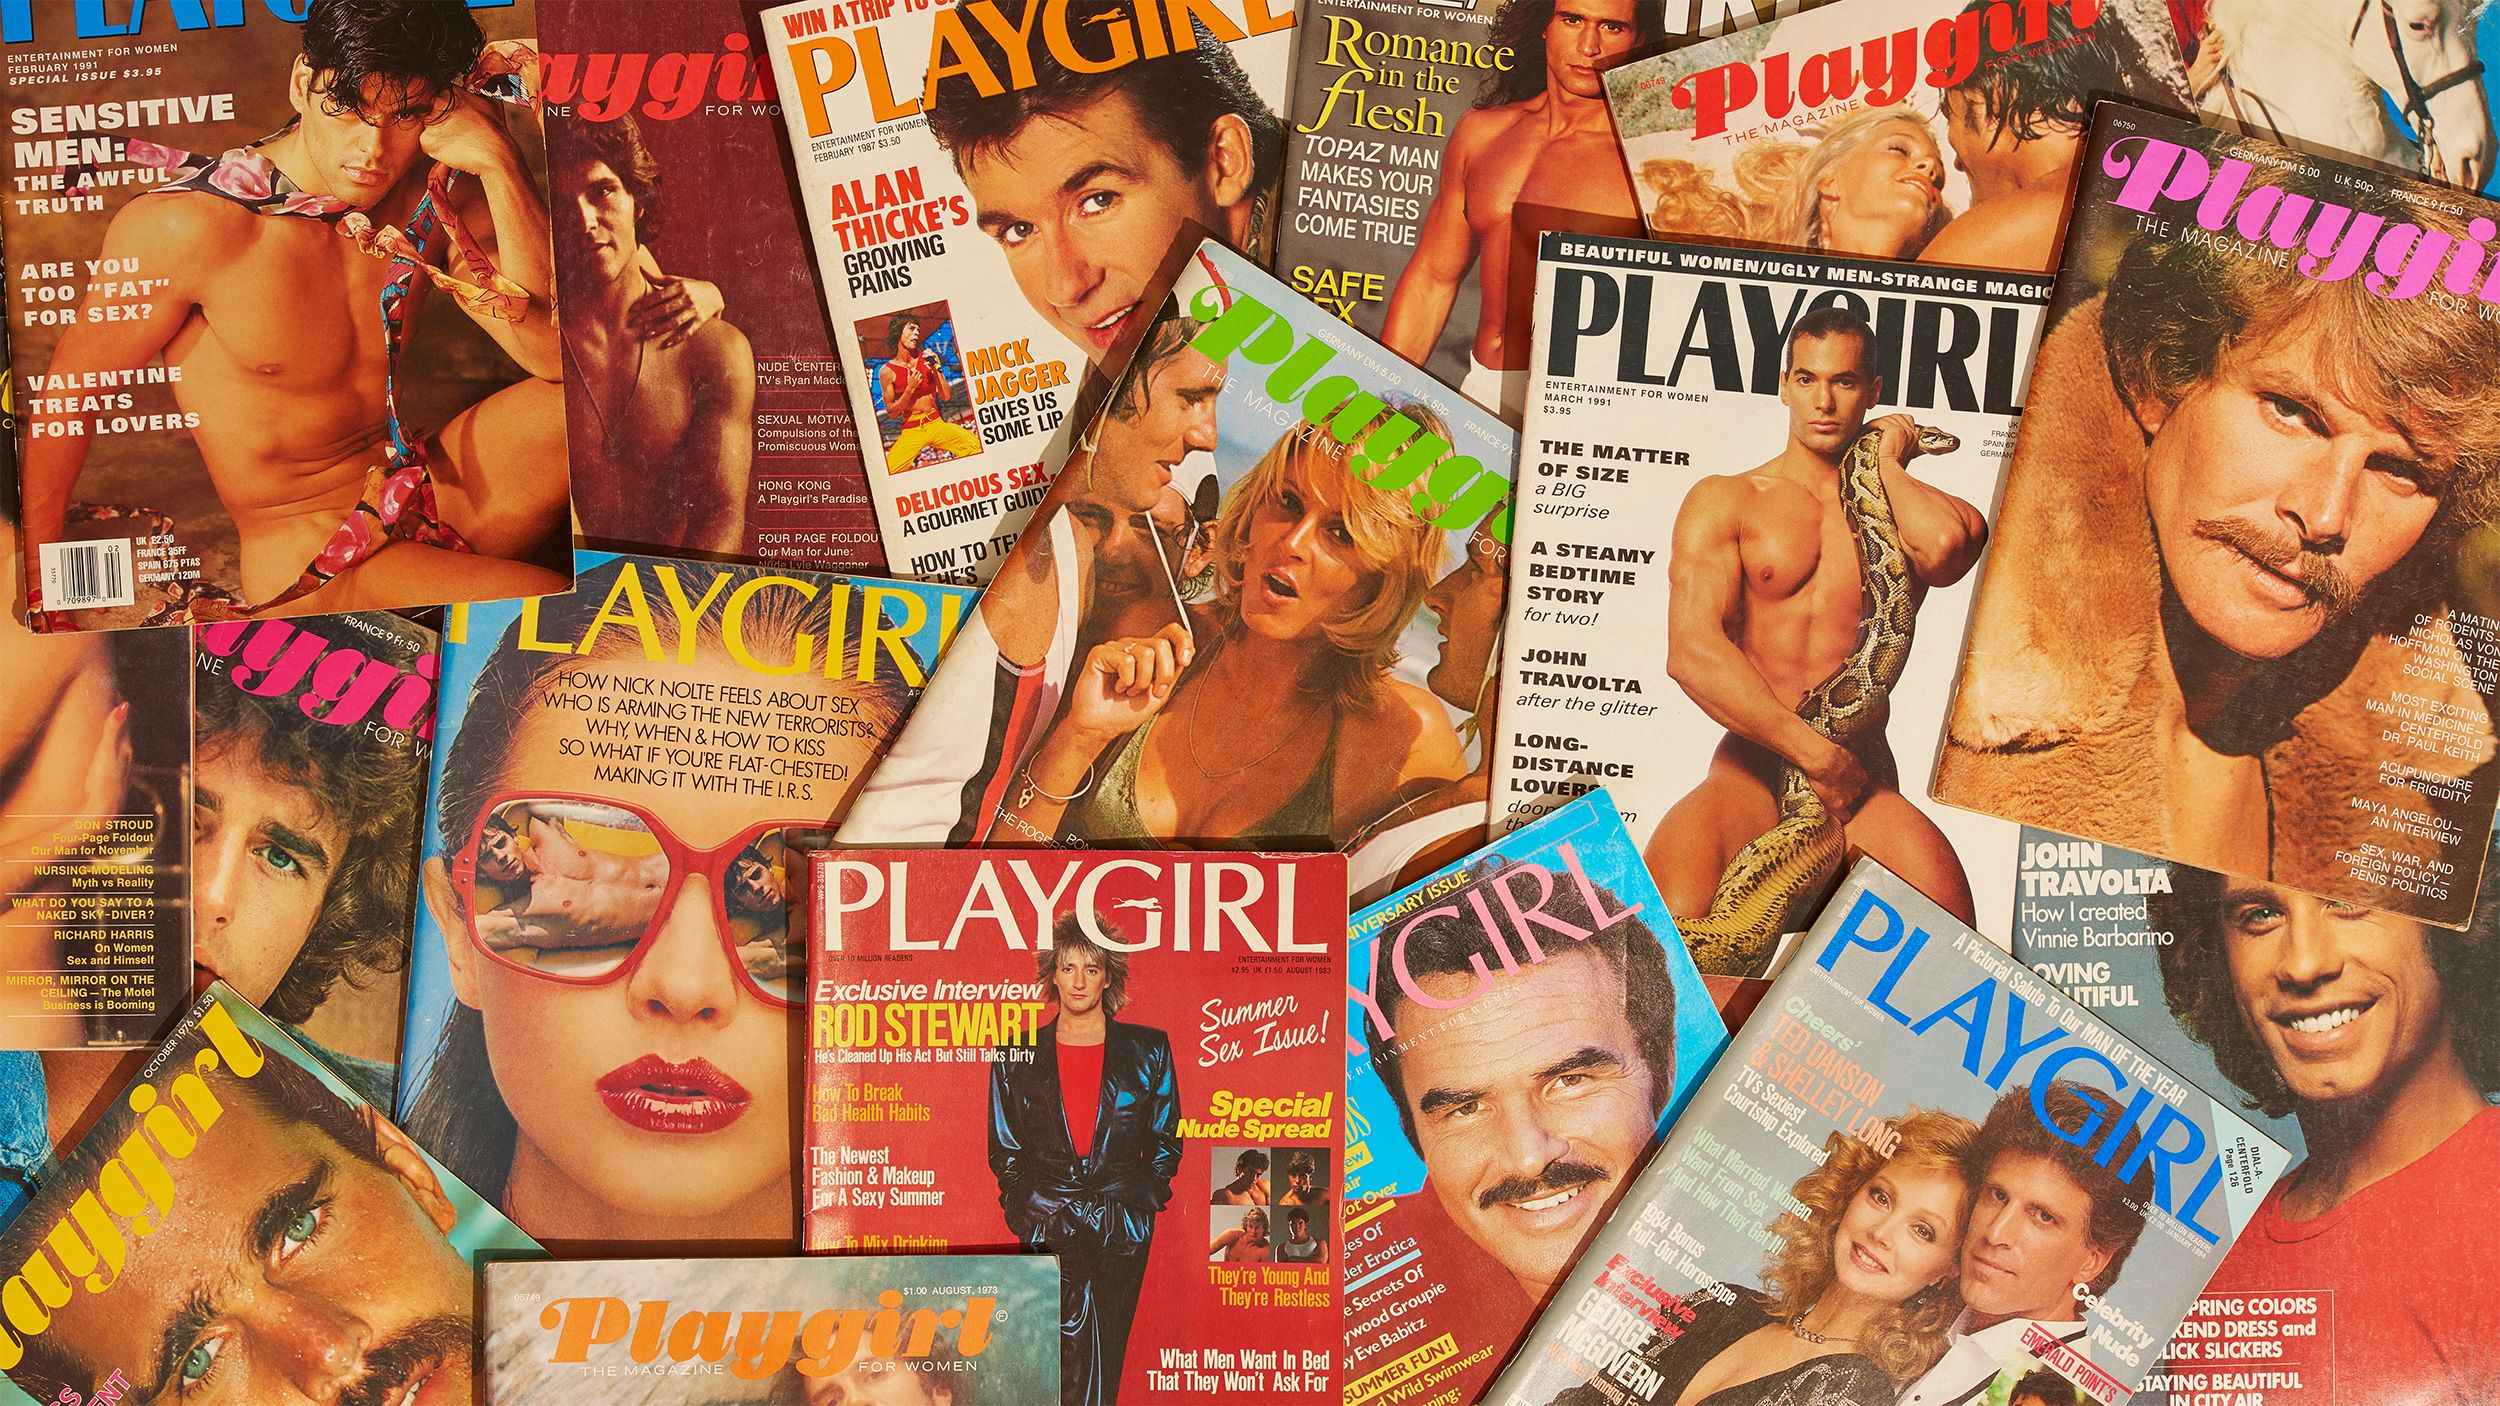 Vintage Urban Nudist - History of Playgirl Magazine - How Playgirl Normalized Male Nudity